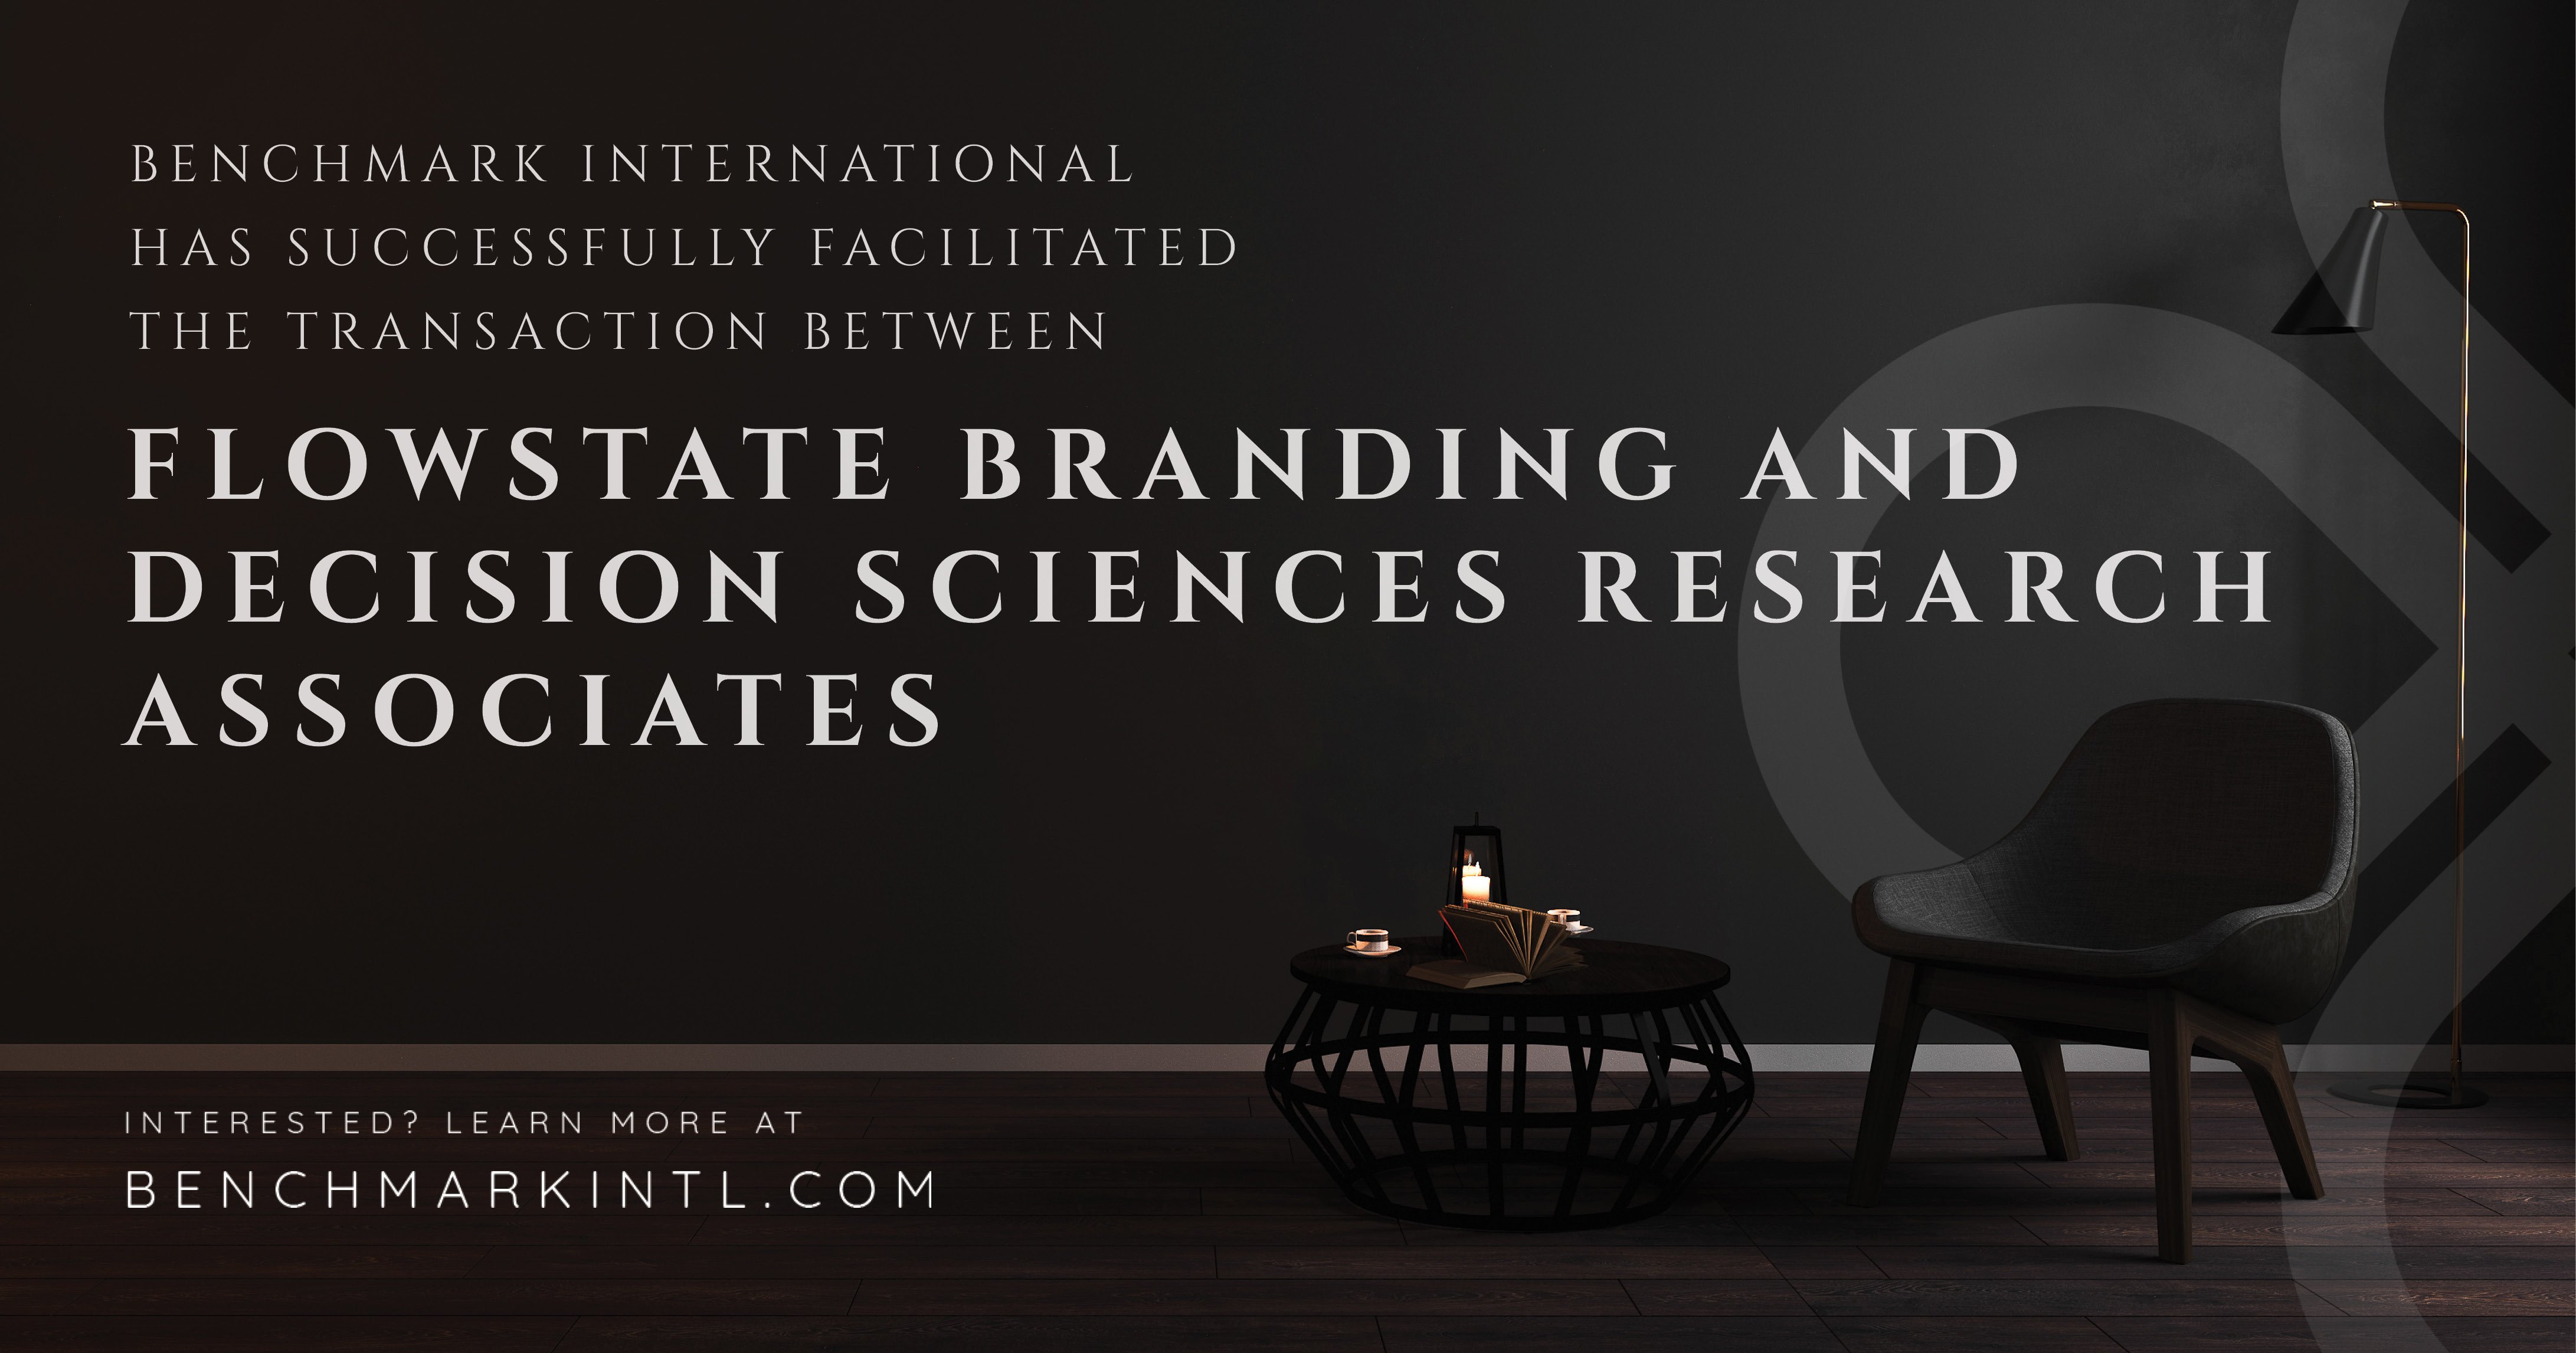 Benchmark International Facilitated The Transaction Of Flowstate Branding To Decision Sciences Research Associates